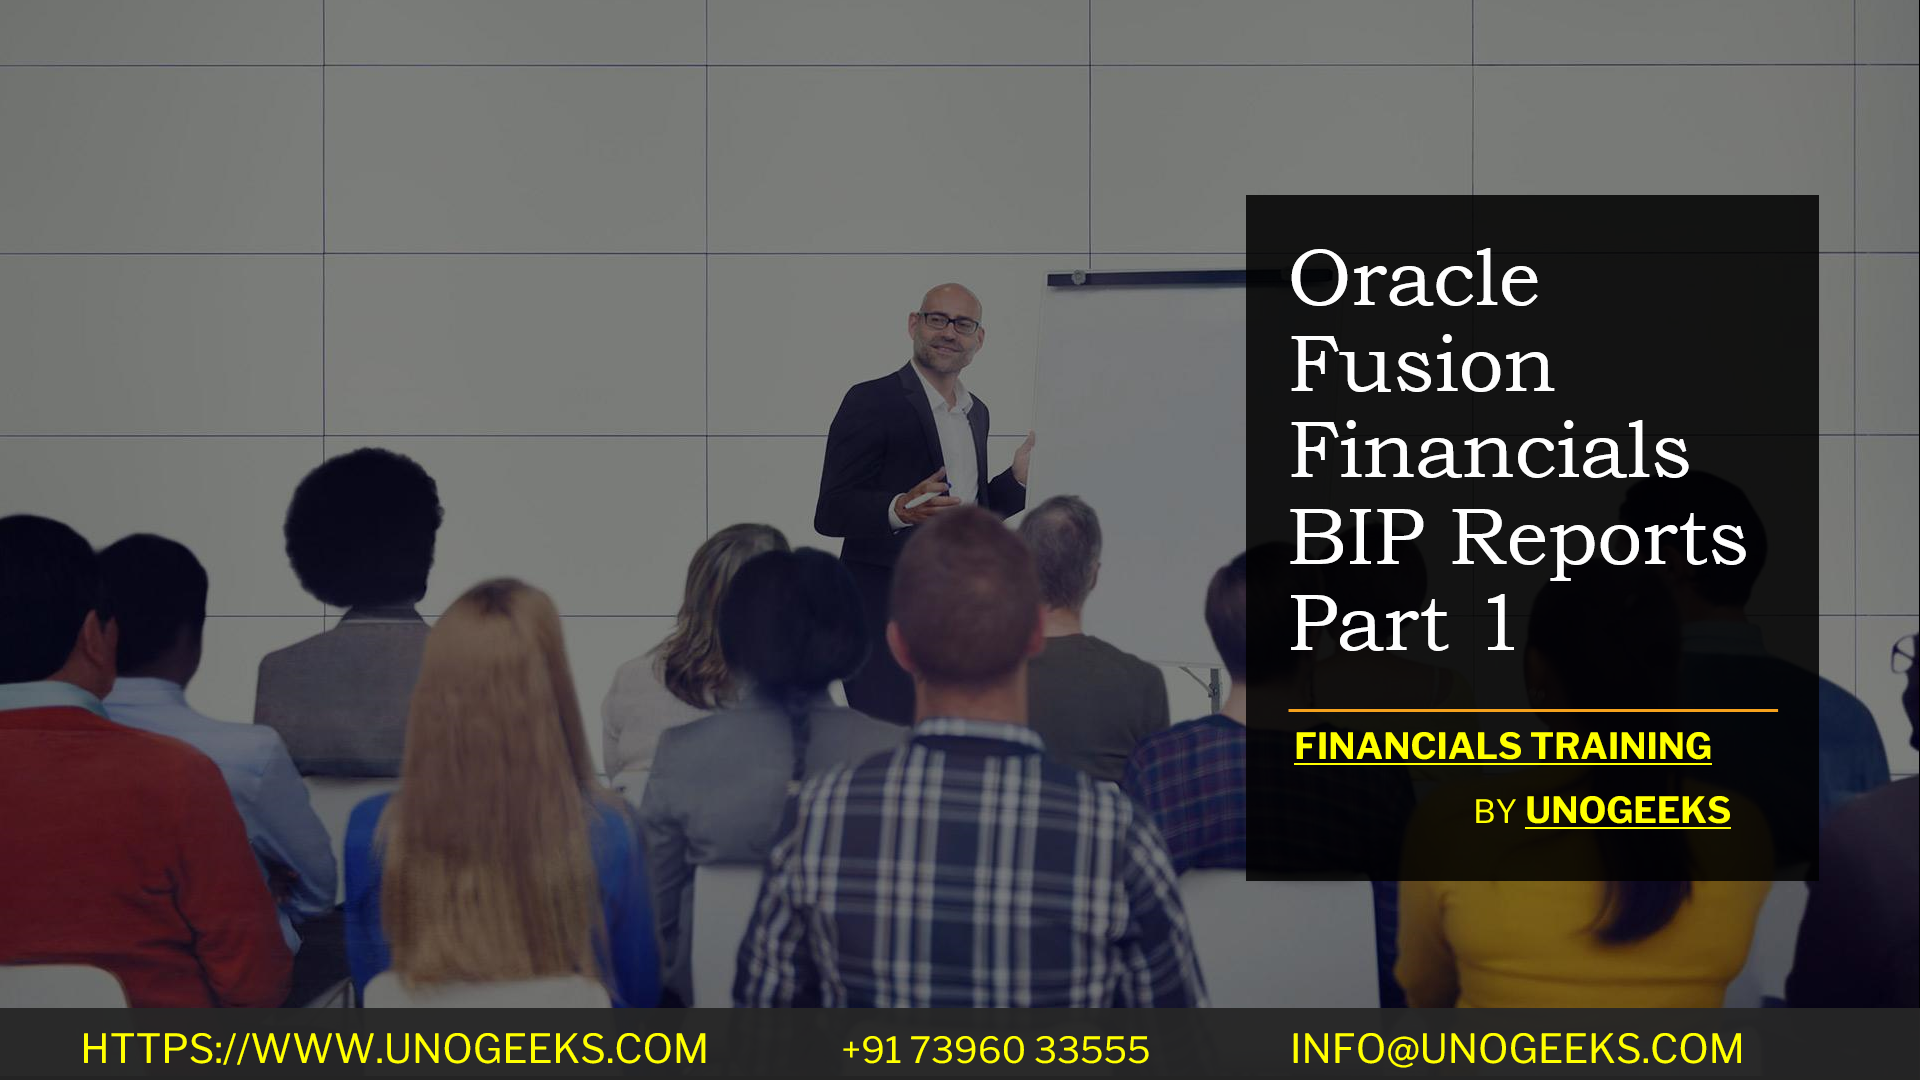 Oracle Fusion Financials BIP Reports Part 1